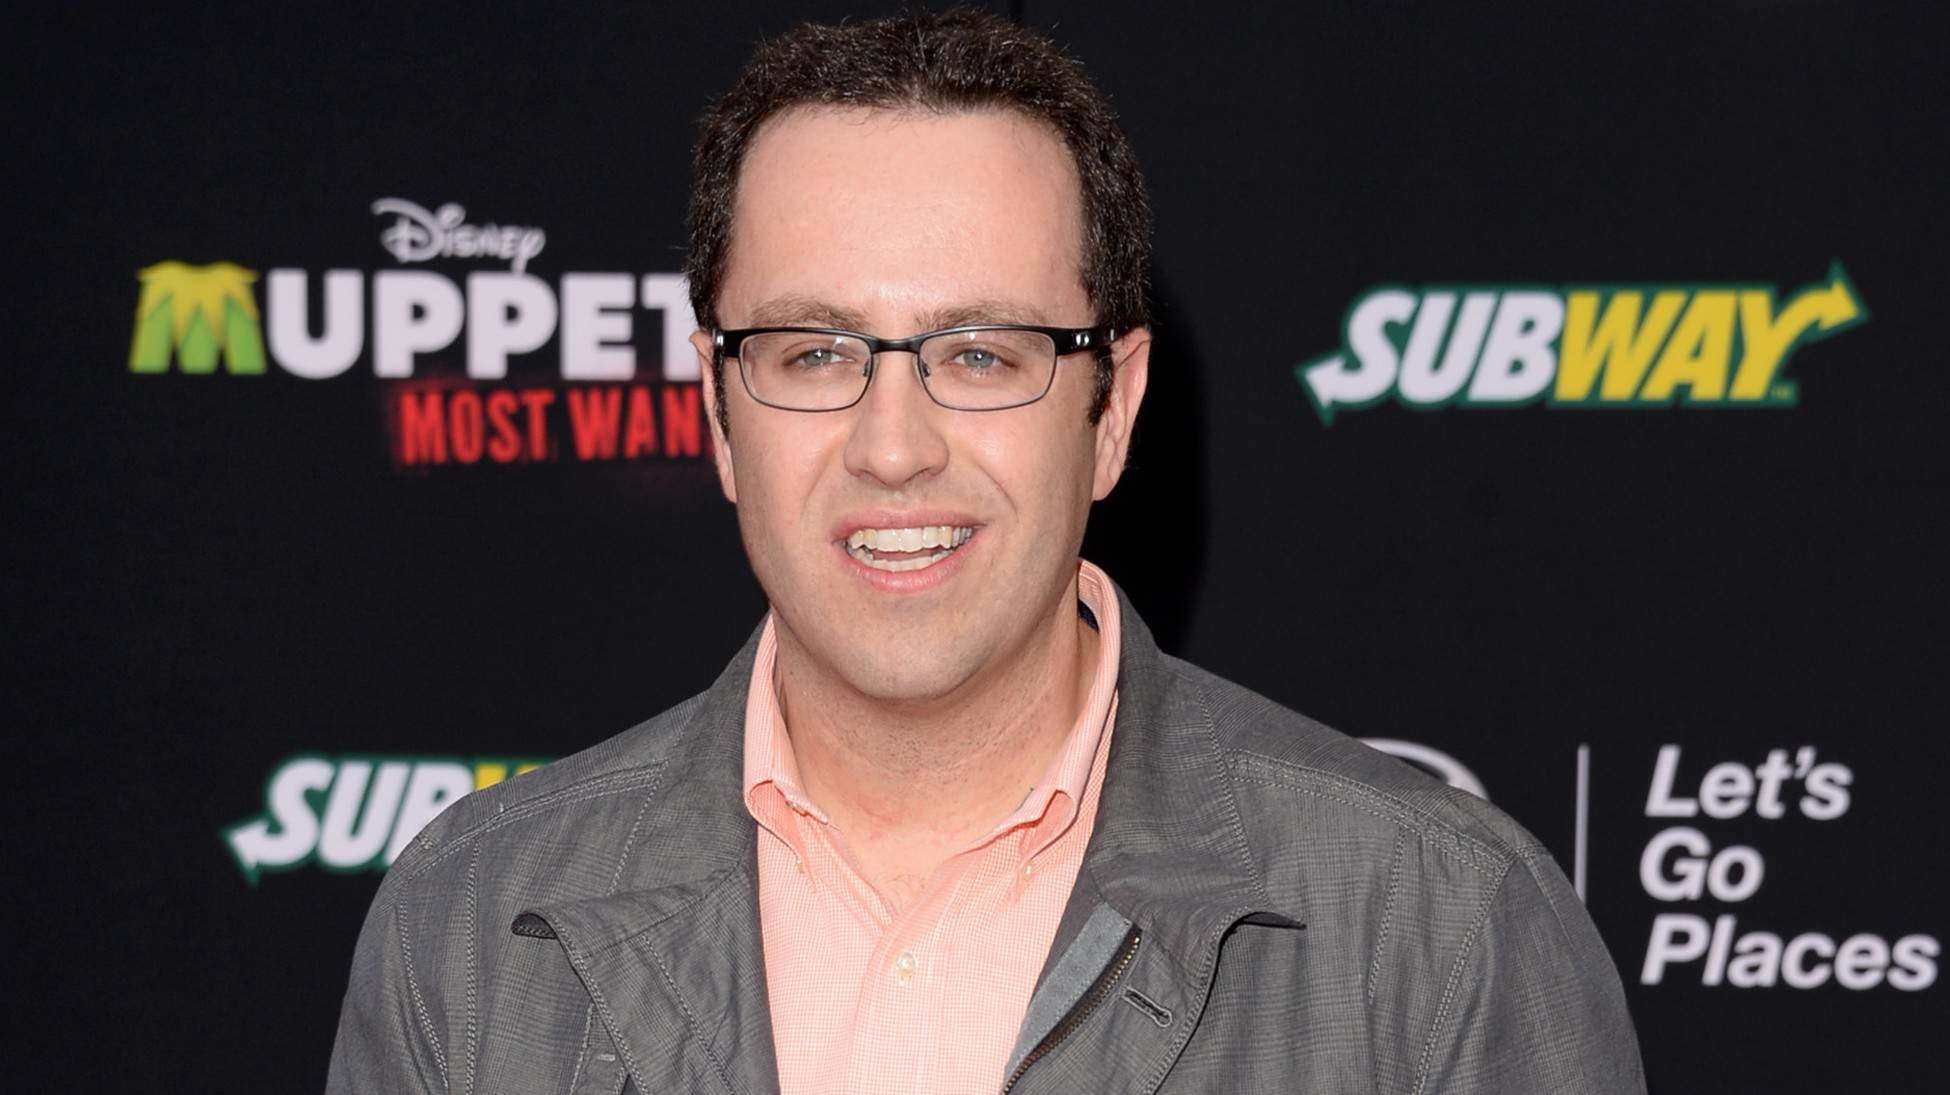 Former Sandwich Pitchman Jared Fogle Allegedly Beaten By Vigilante Inmate Who Hates Pedophile's